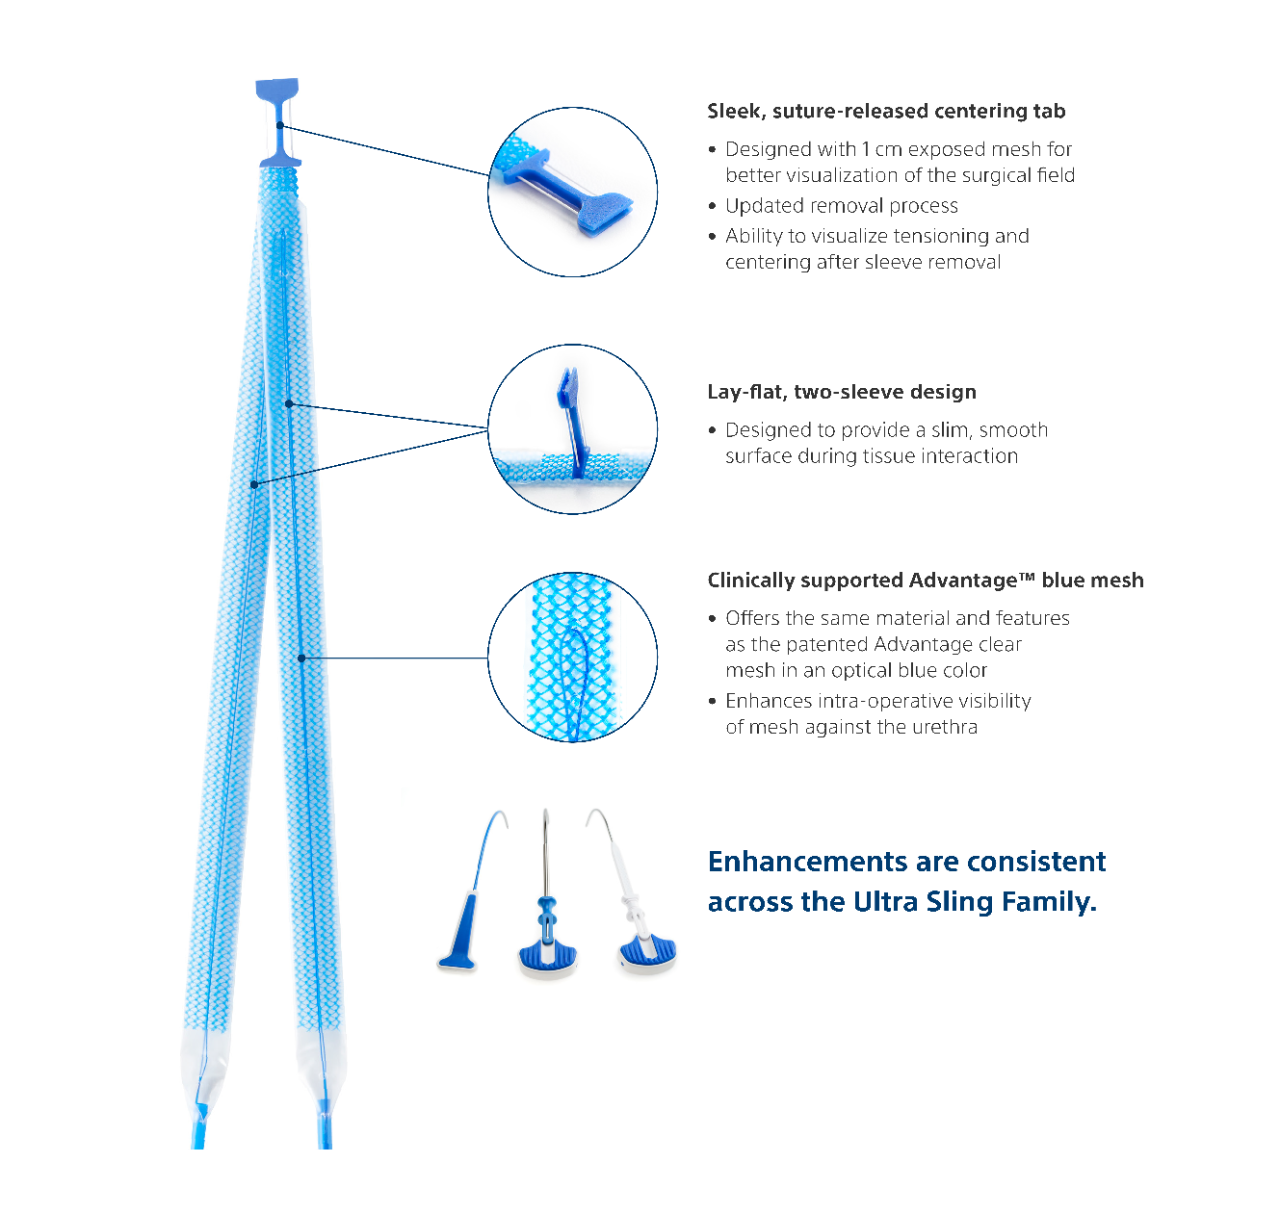 Ultra infographic, displaying the sleek, suture-released centering tab. Lay flat, two-sleeve design. Clinically supported AdVantage Blue Mesh. Consistency across surgical approaches. Ultra innovation includes Boston Scientific's clinically supported Advantage mesh, which is supported by more than 100 publications to date and has been used in more than 1 million slings.